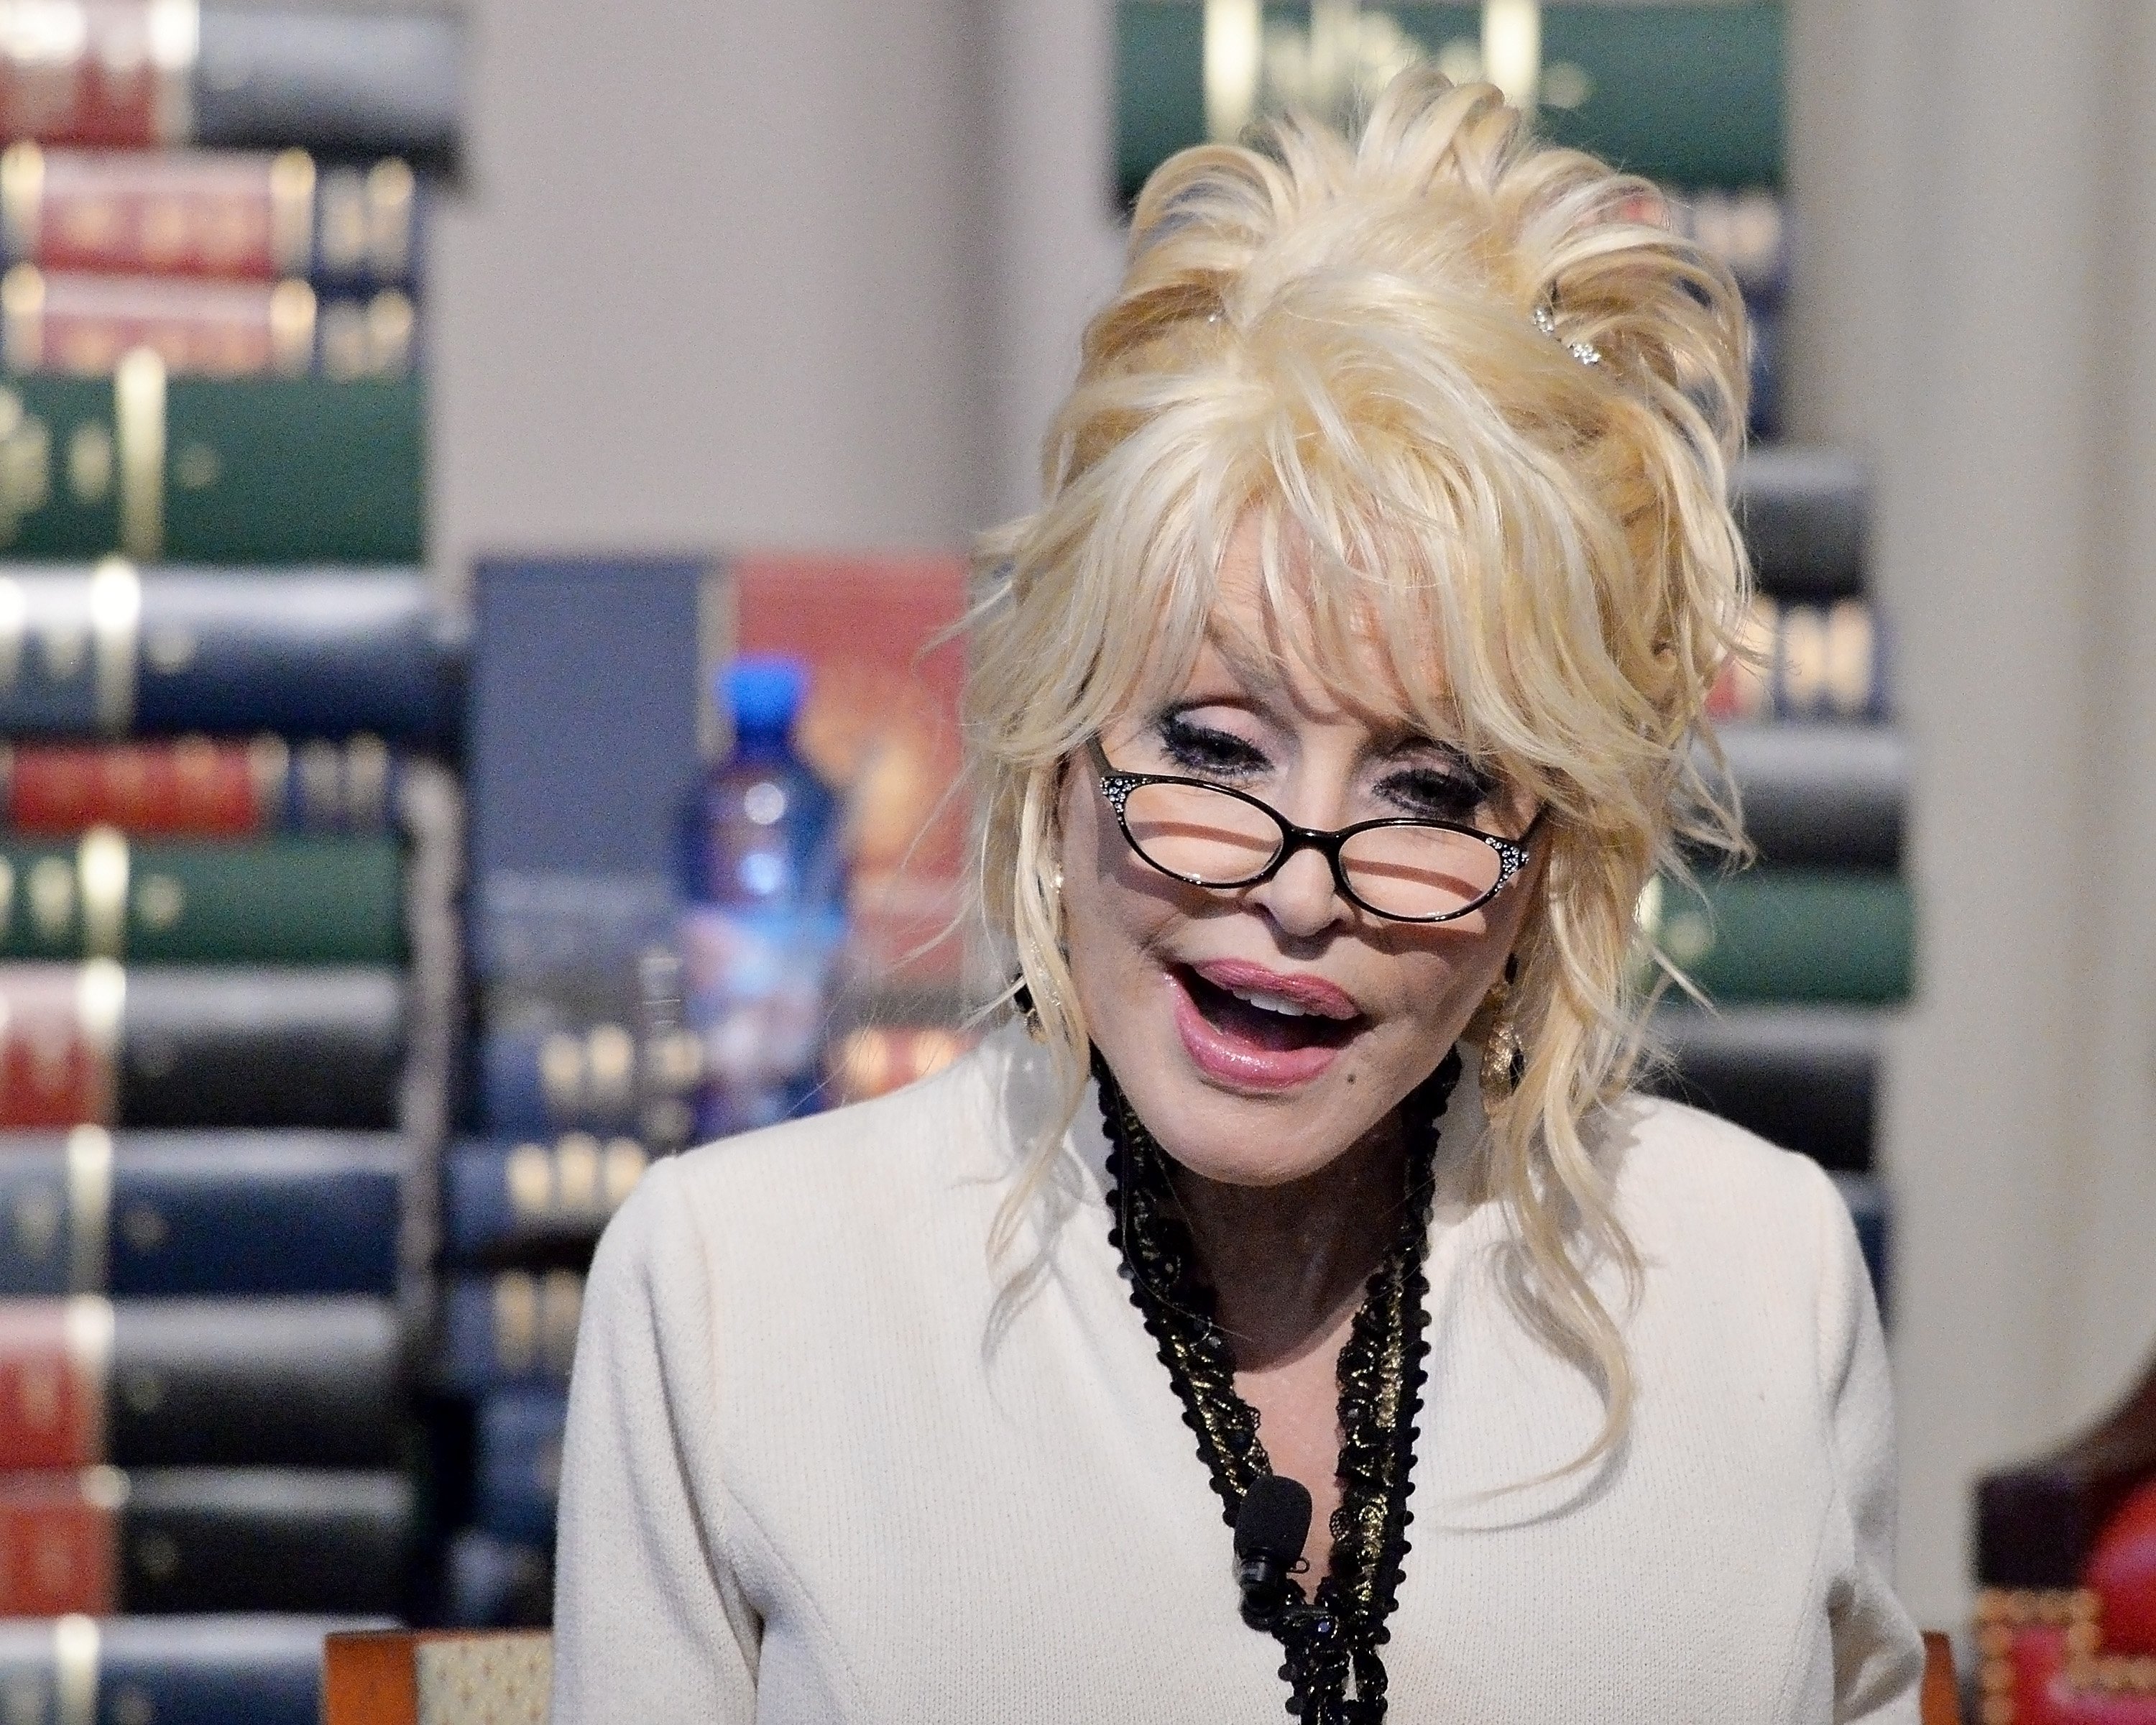 Dolly Parton in front of stacks of books for the Imagination Library.